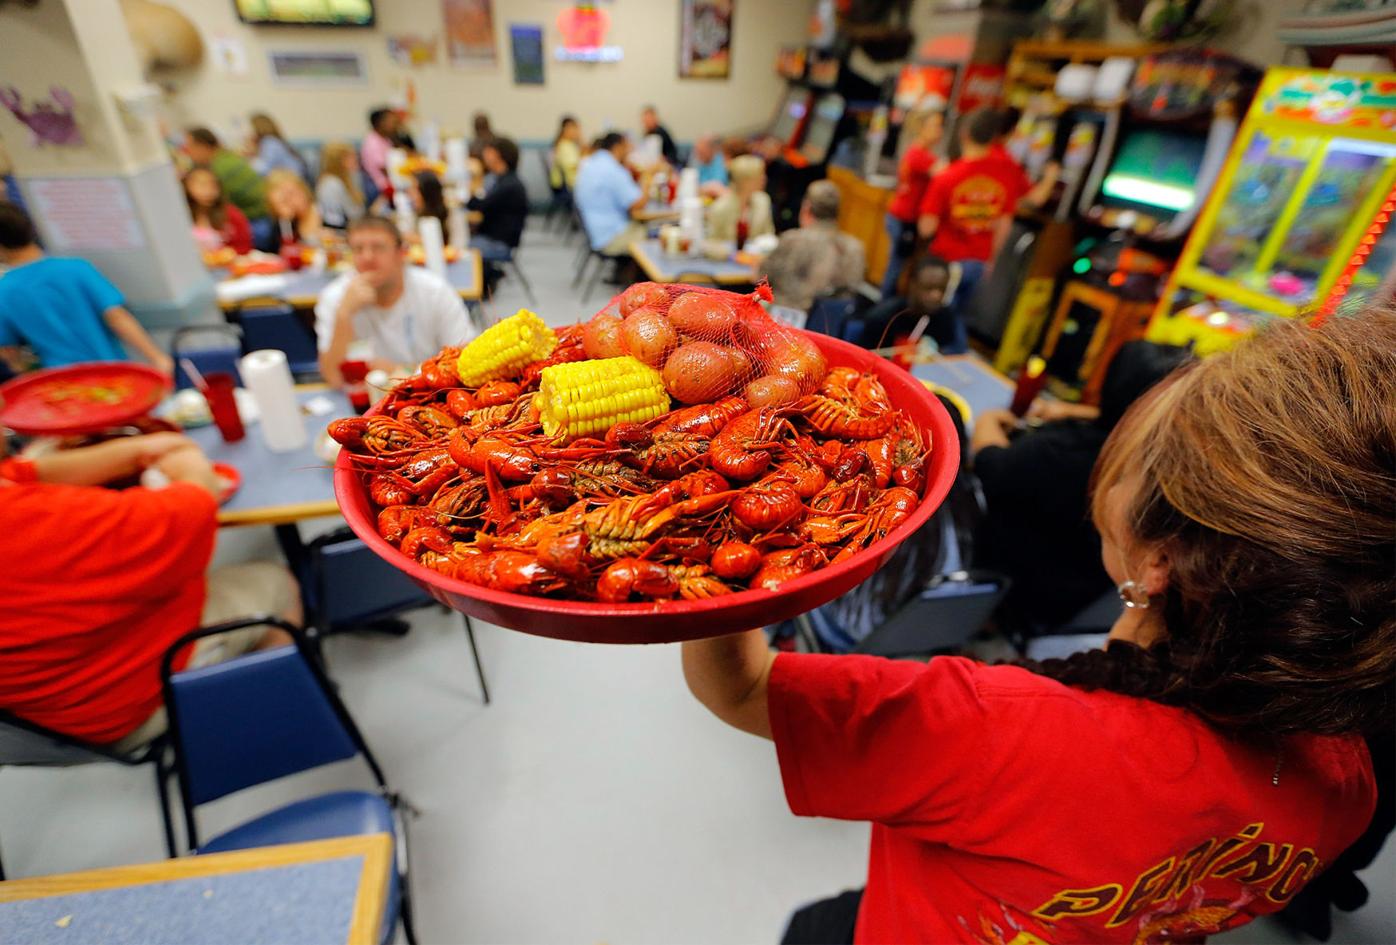 Where to eat next in New Orleans? From crawfish to corned beef, 8